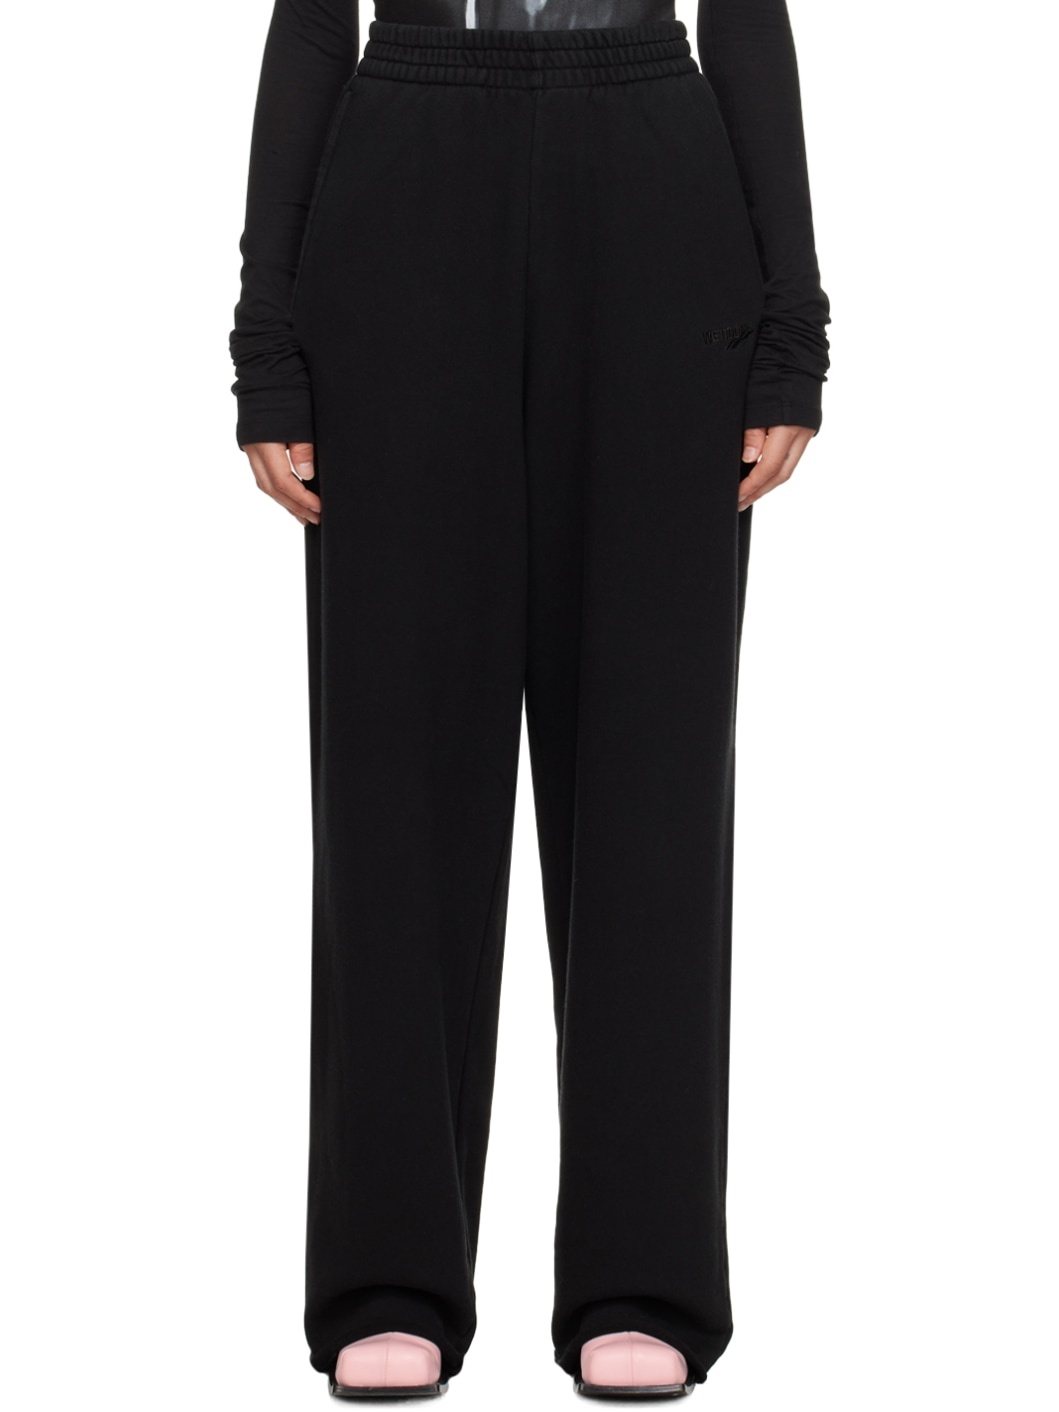 Black Embroidered Lounge Pants - 1